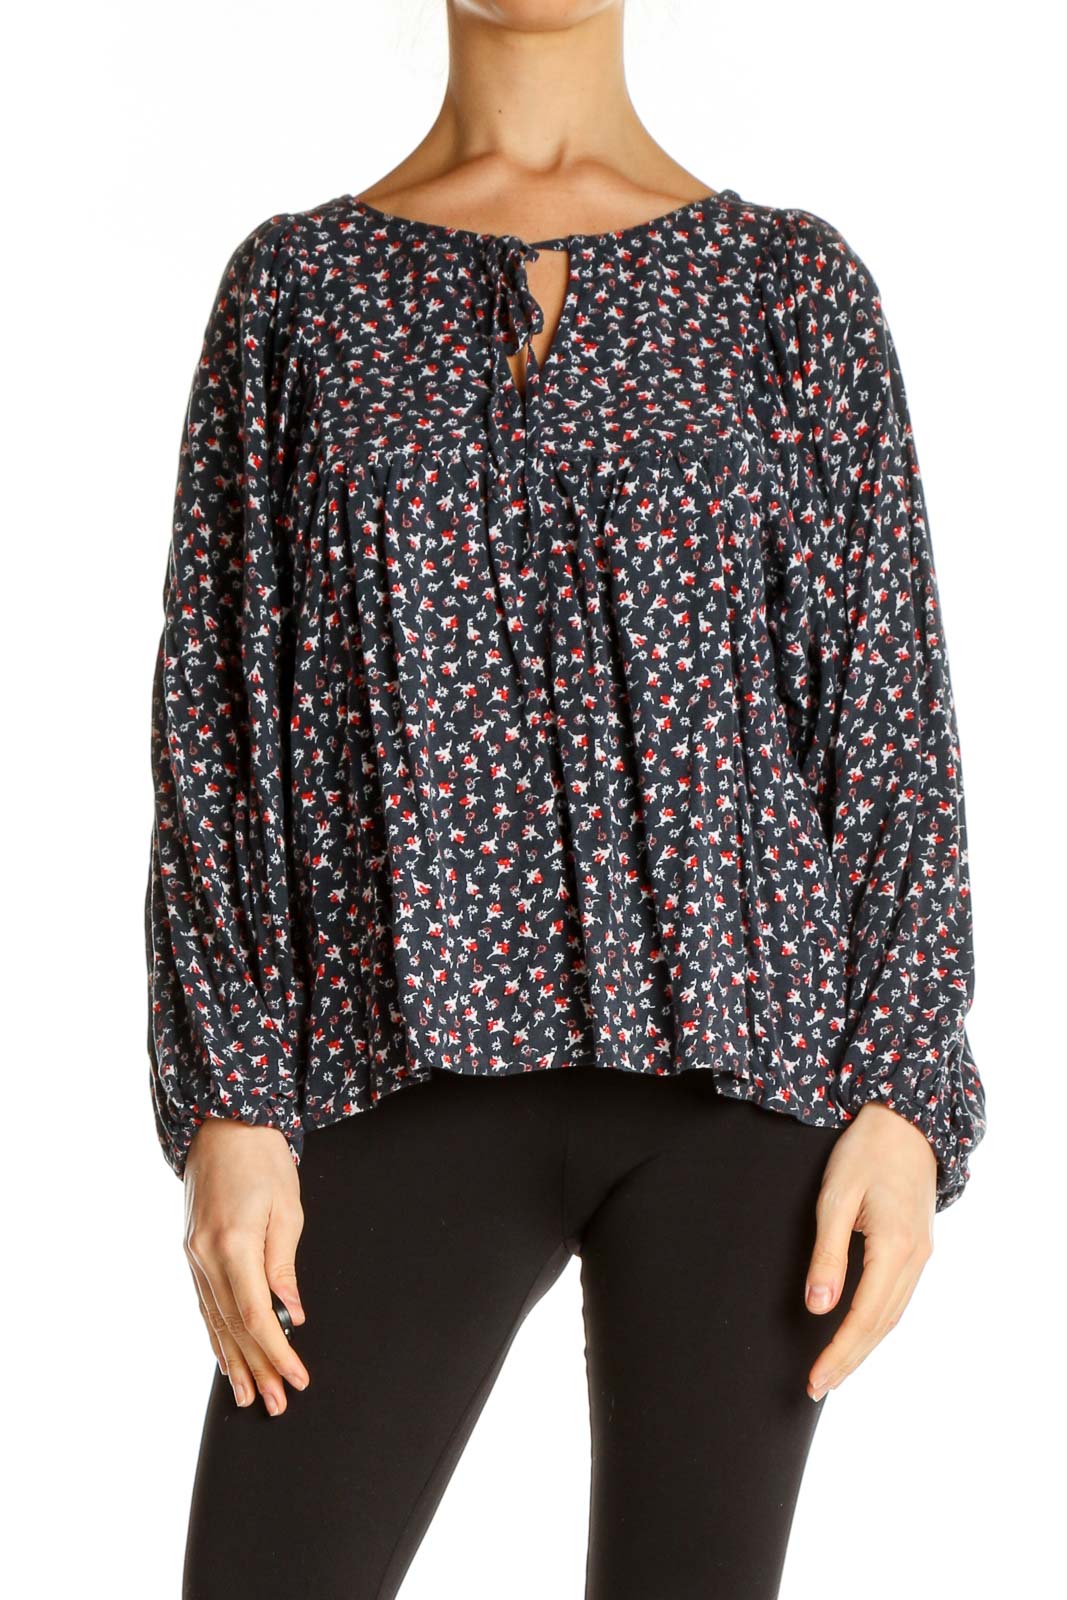 Blue Floral Print All Day Wear Blouse Front